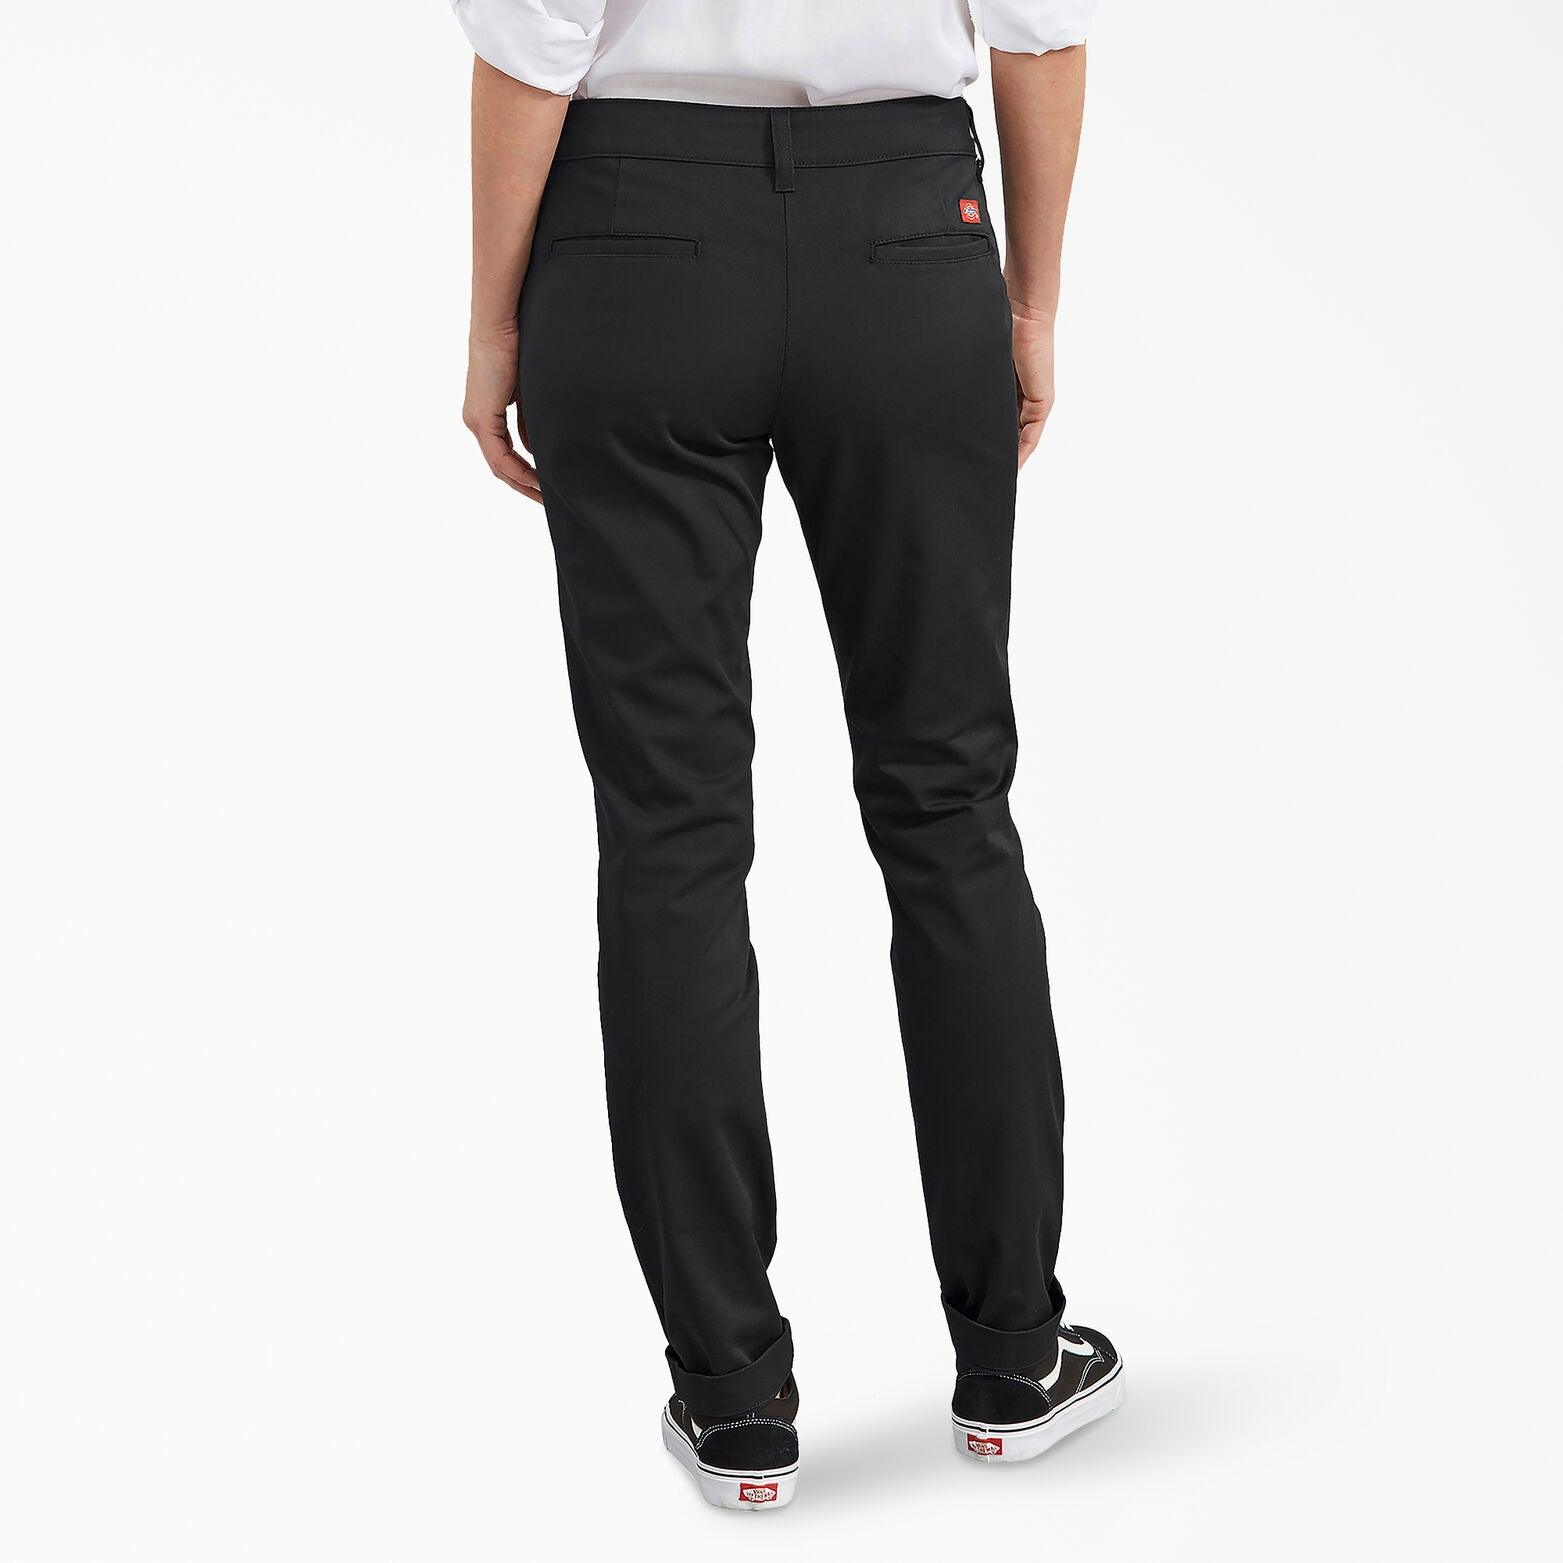 Women's Slim Fit Pants - Rinsed Black - Purpose-Built / Home of the Trades